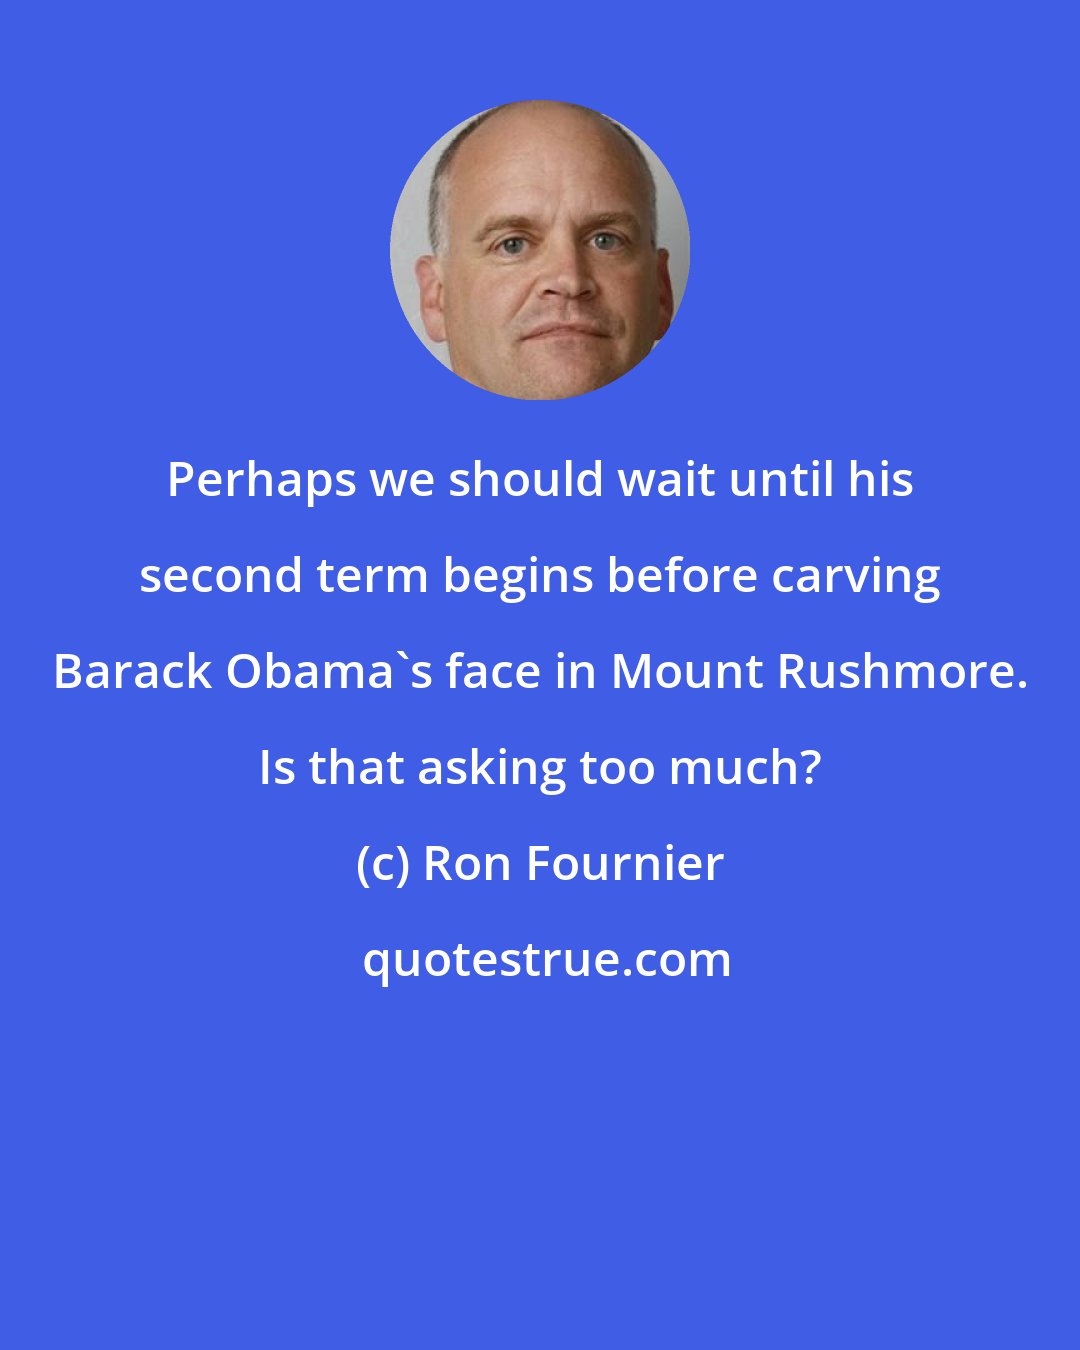 Ron Fournier: Perhaps we should wait until his second term begins before carving Barack Obama's face in Mount Rushmore. Is that asking too much?